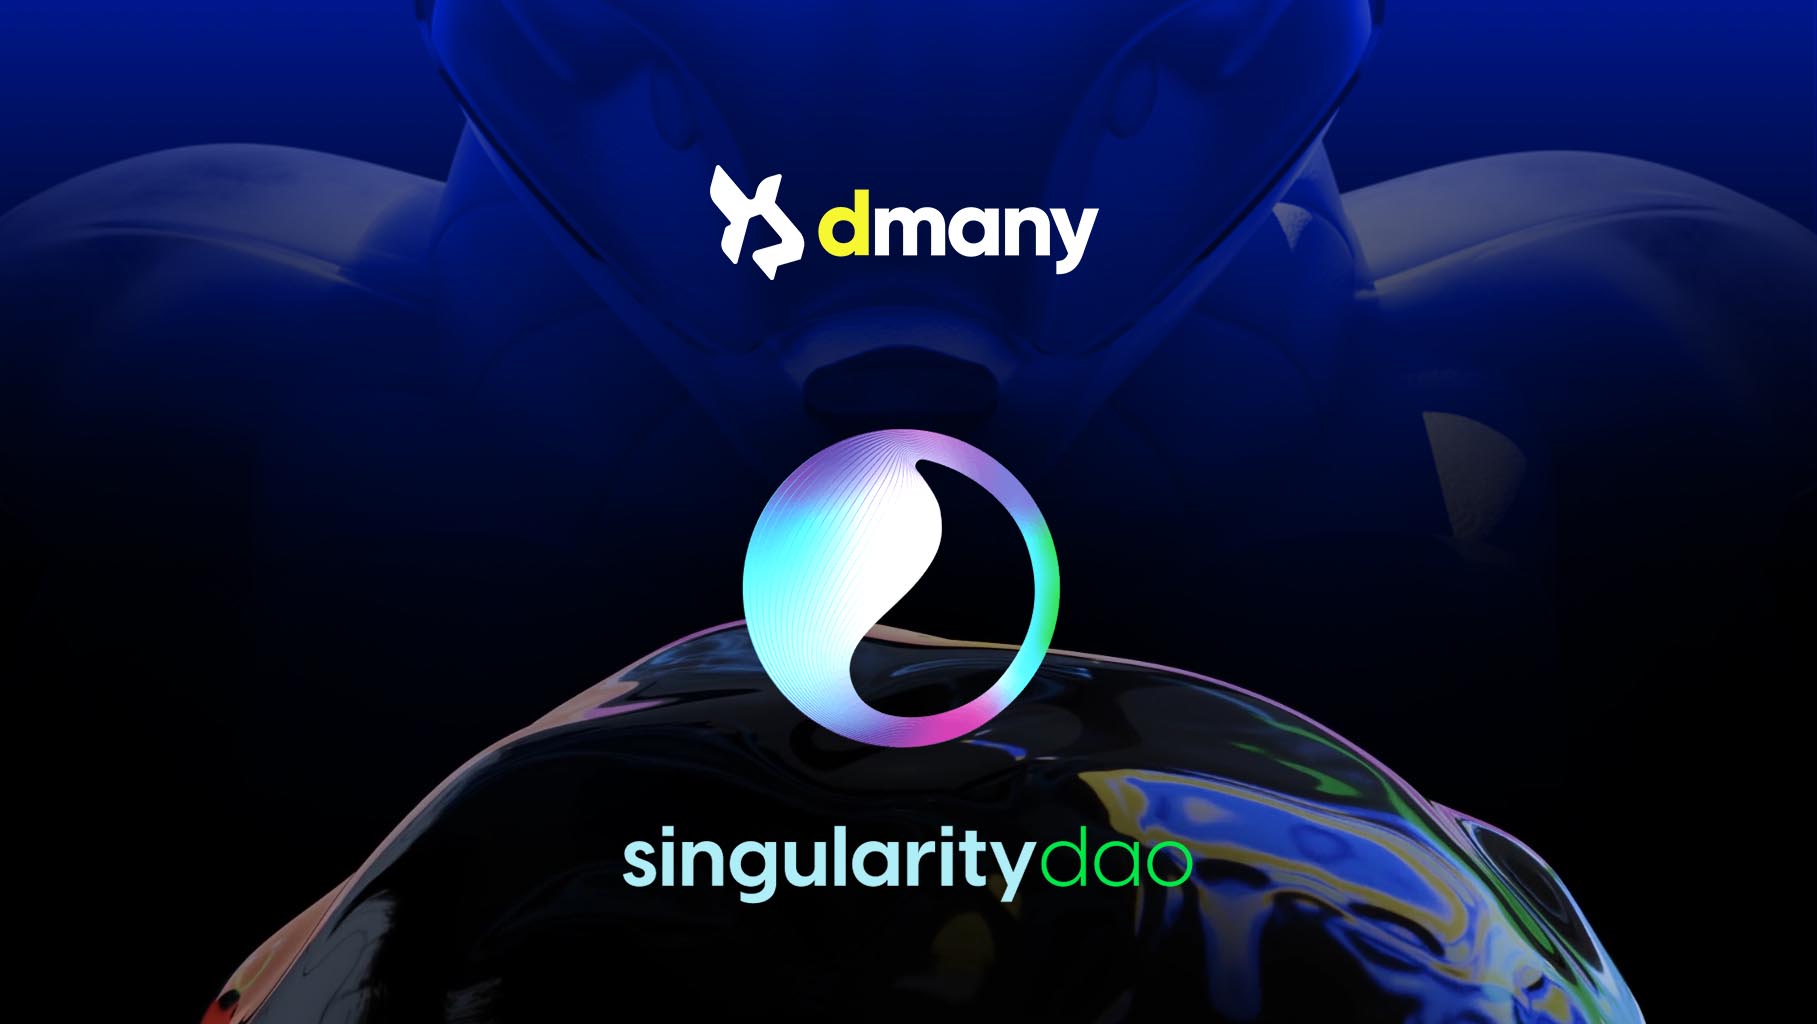 Dmany Forms Strategic Partnership with SingularityDAO to Innovate Social Engagement Using AI and Web3